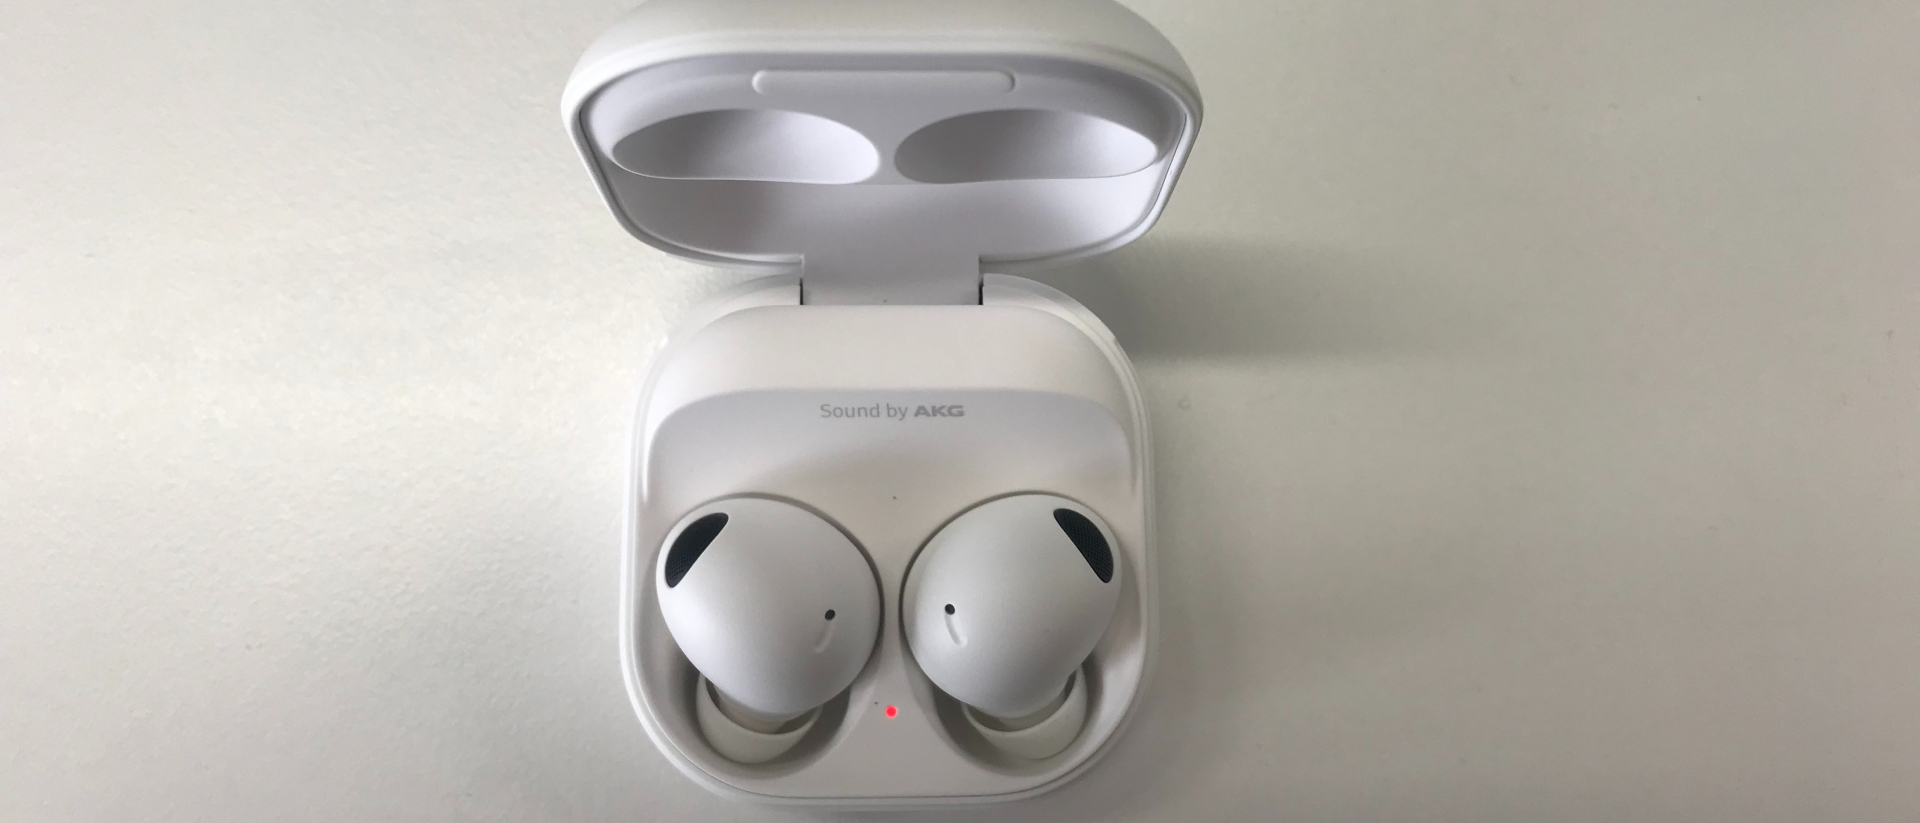 Samsung Galaxy Buds 2 Pro review: All about the ecosystem